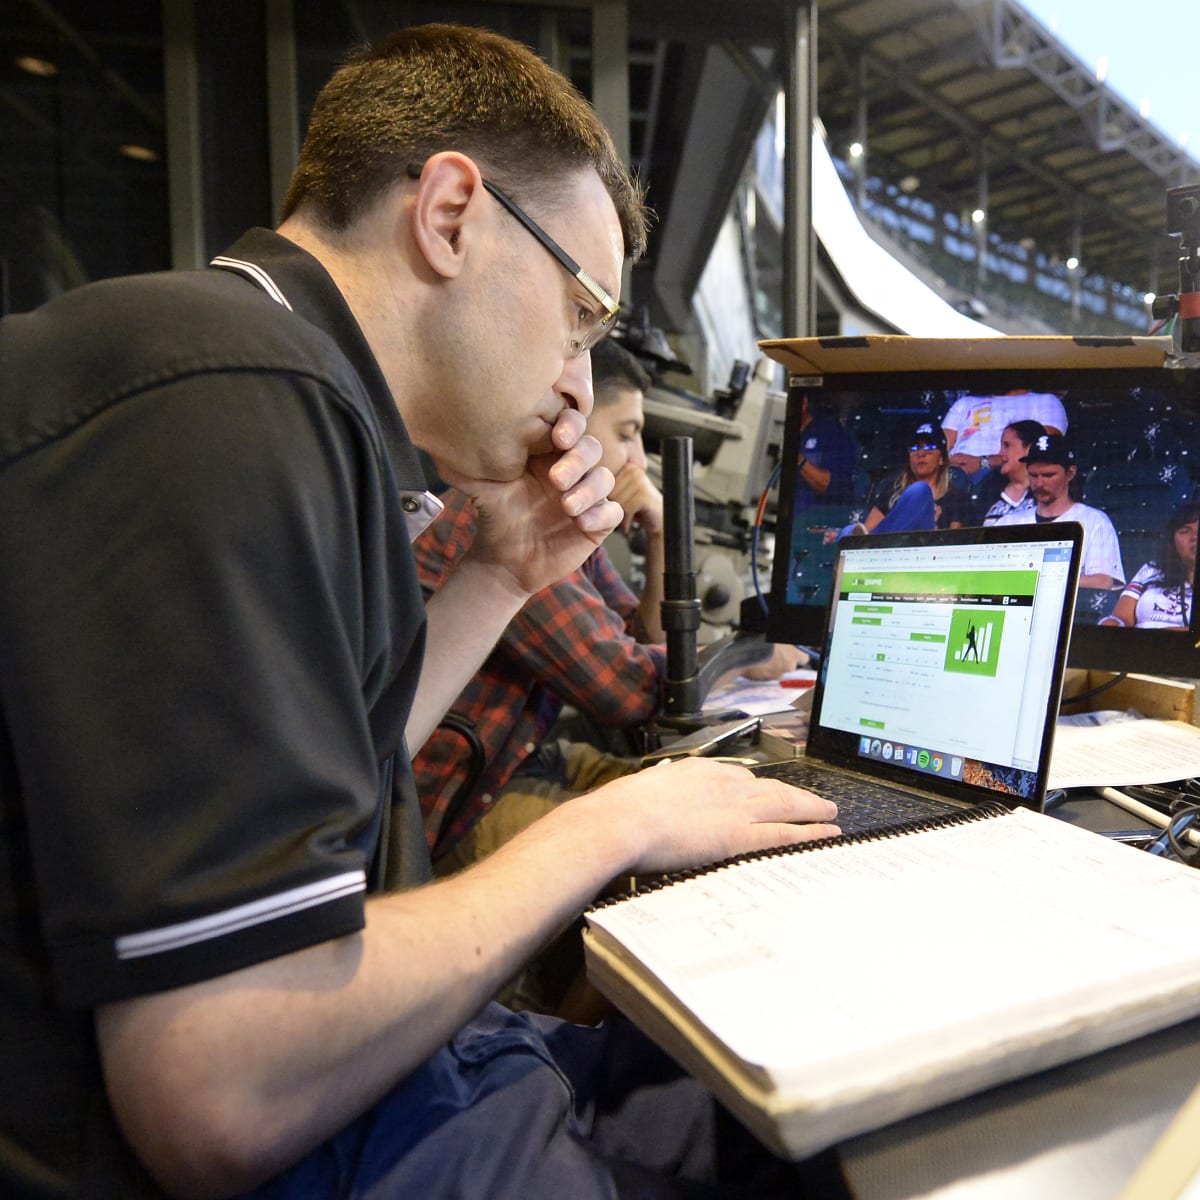 White Sox commentator Jason Benetti joins Fox Sports for college football